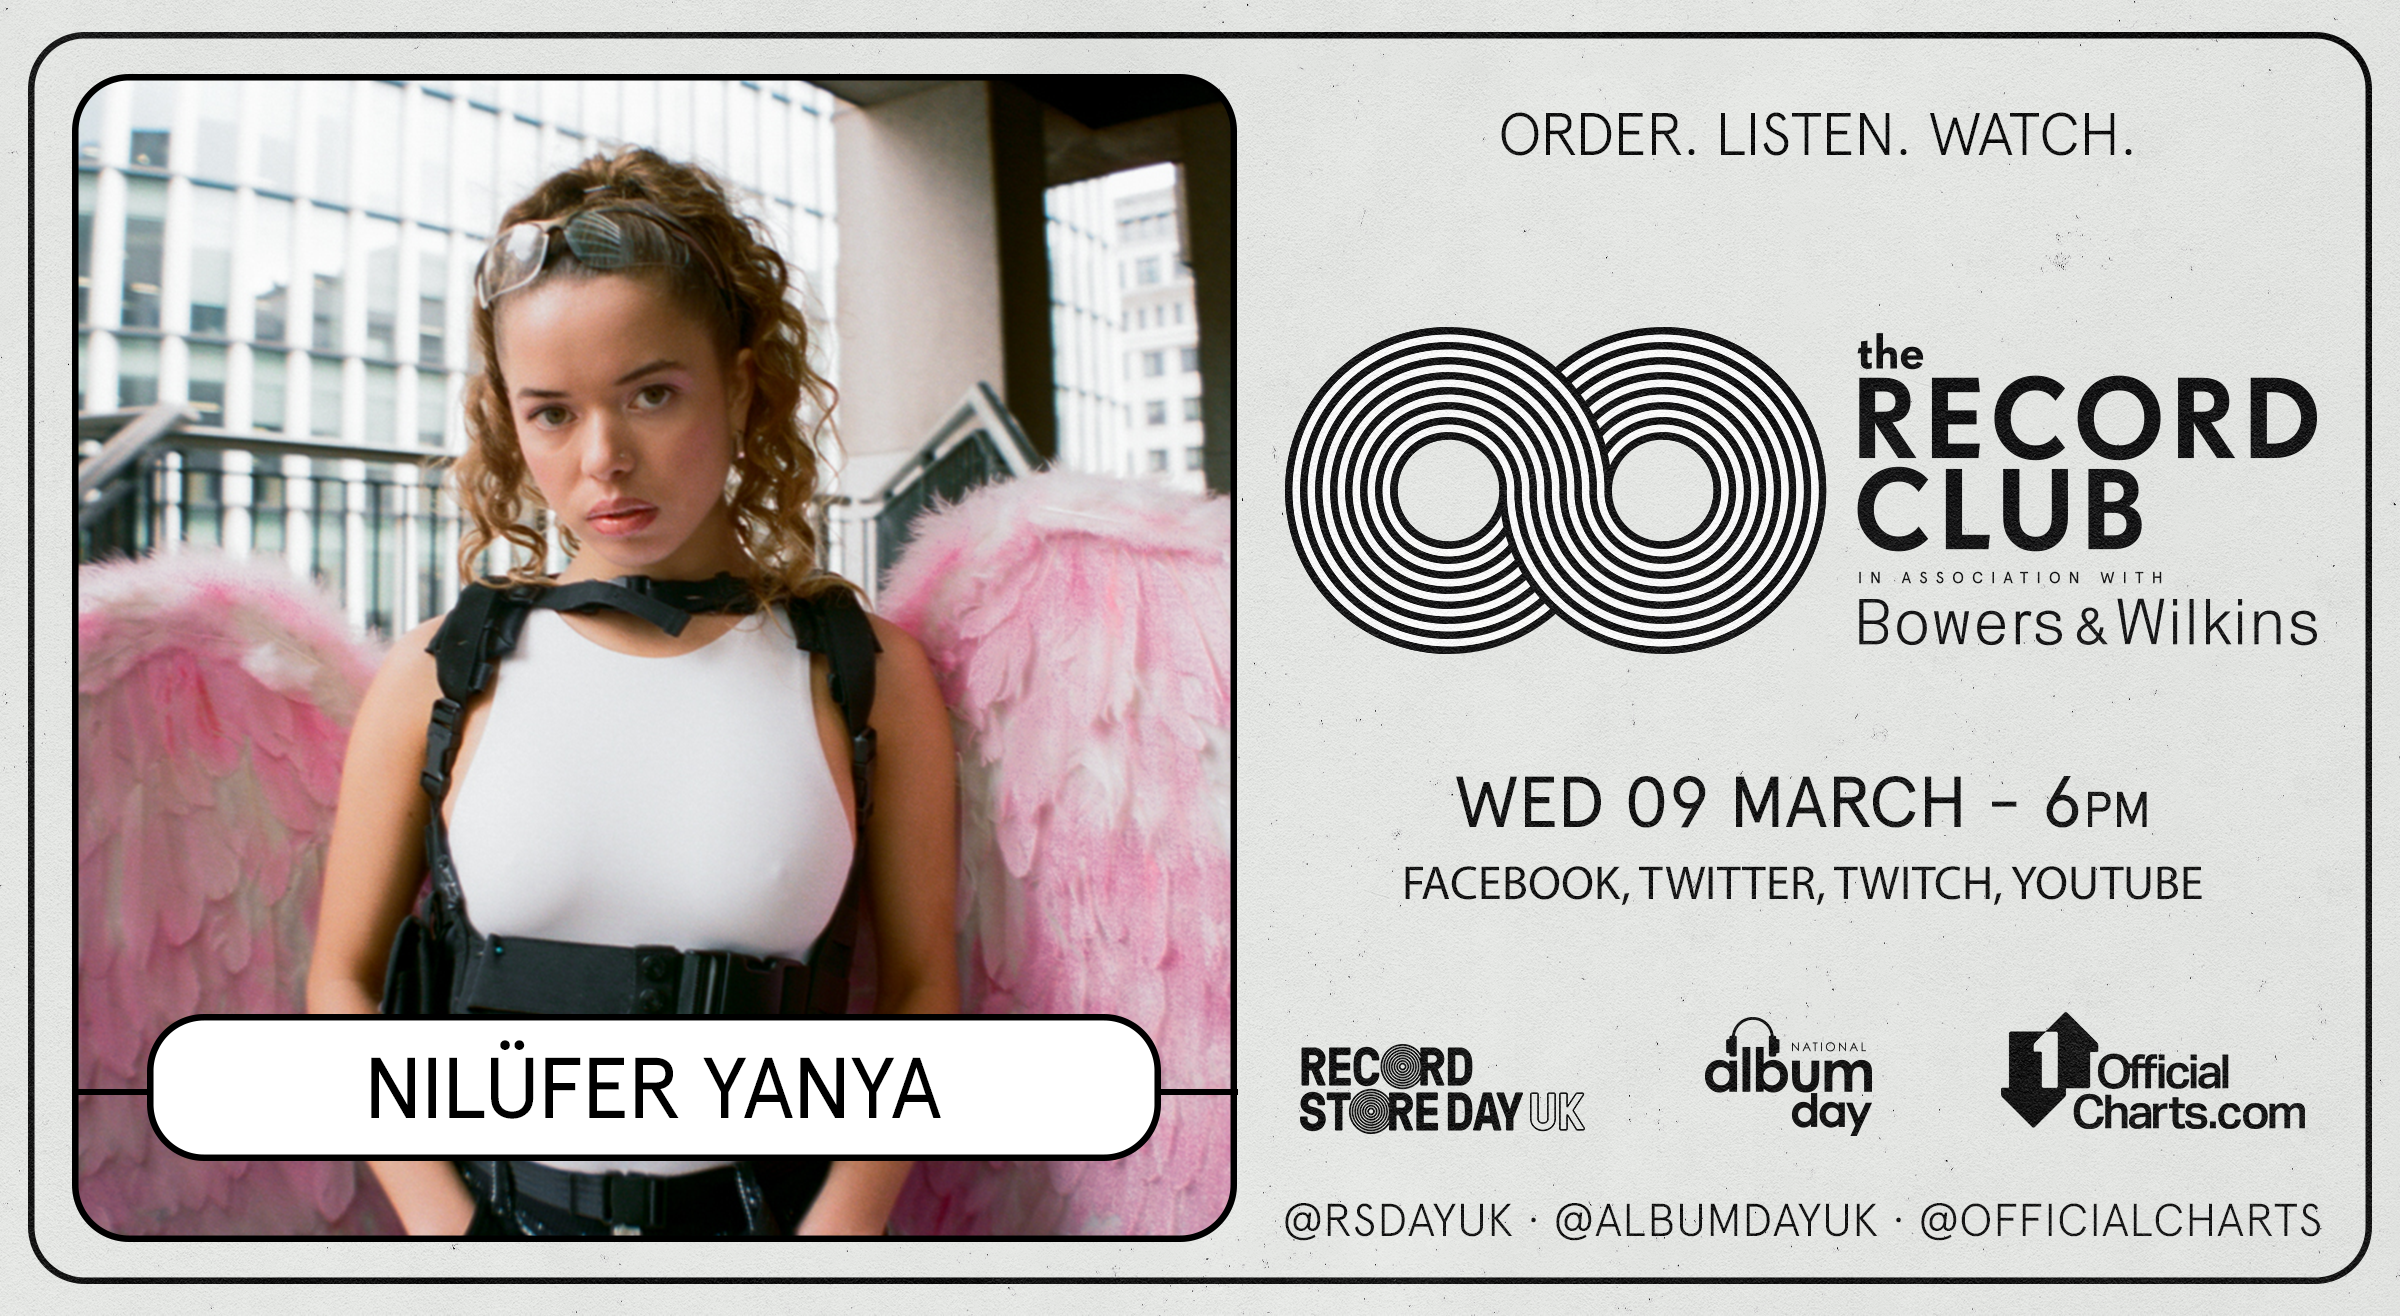 Nilüfer Yanya will join The Record Club to discuss new album PAINLESS